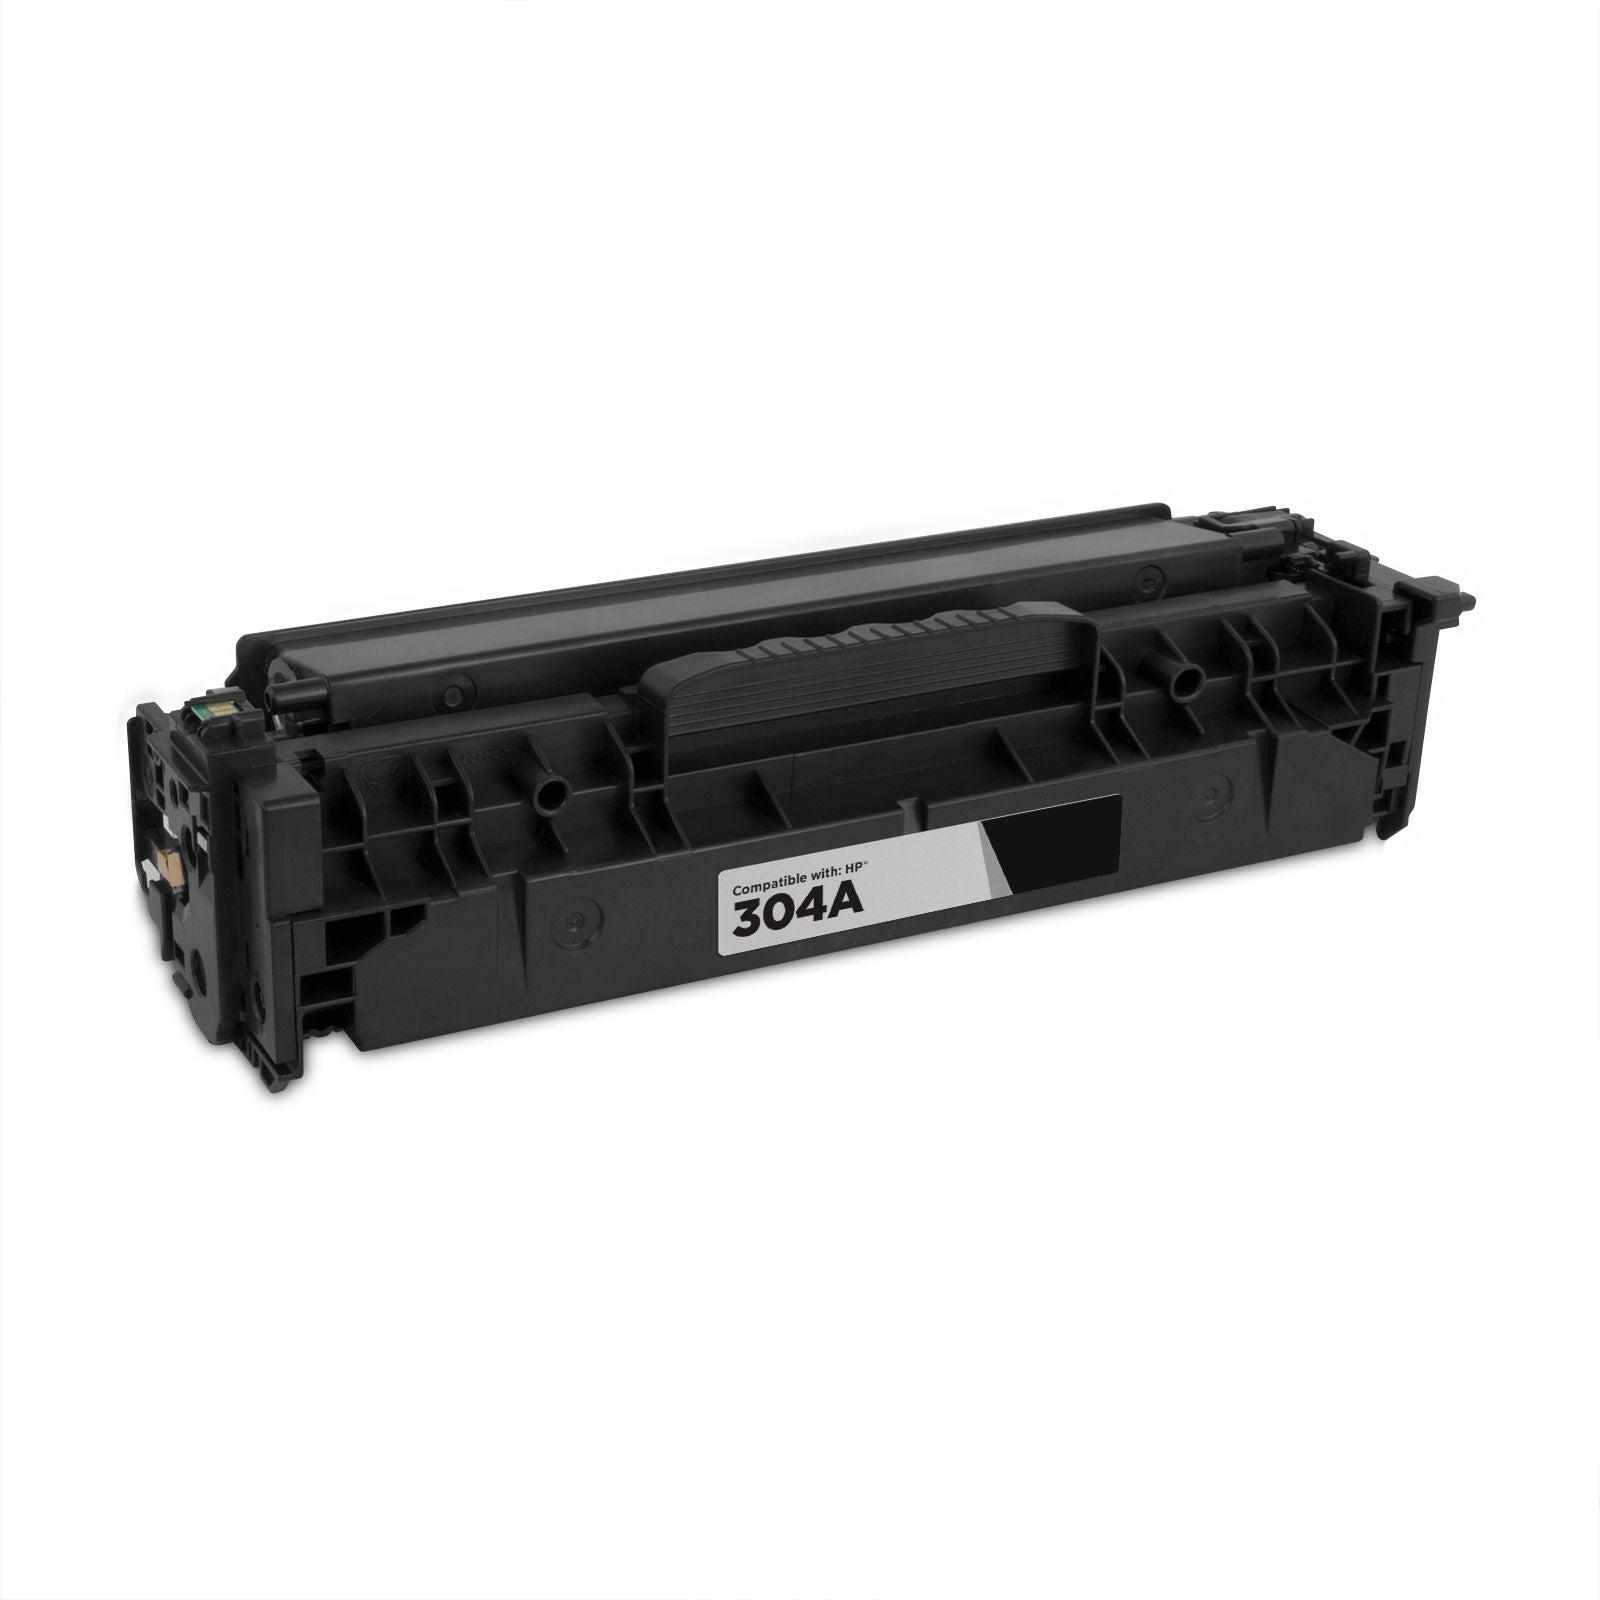 IMPERIAL BRAND Compatible toner cartridge for HP 304A BLACK TONER 3500 PAGES